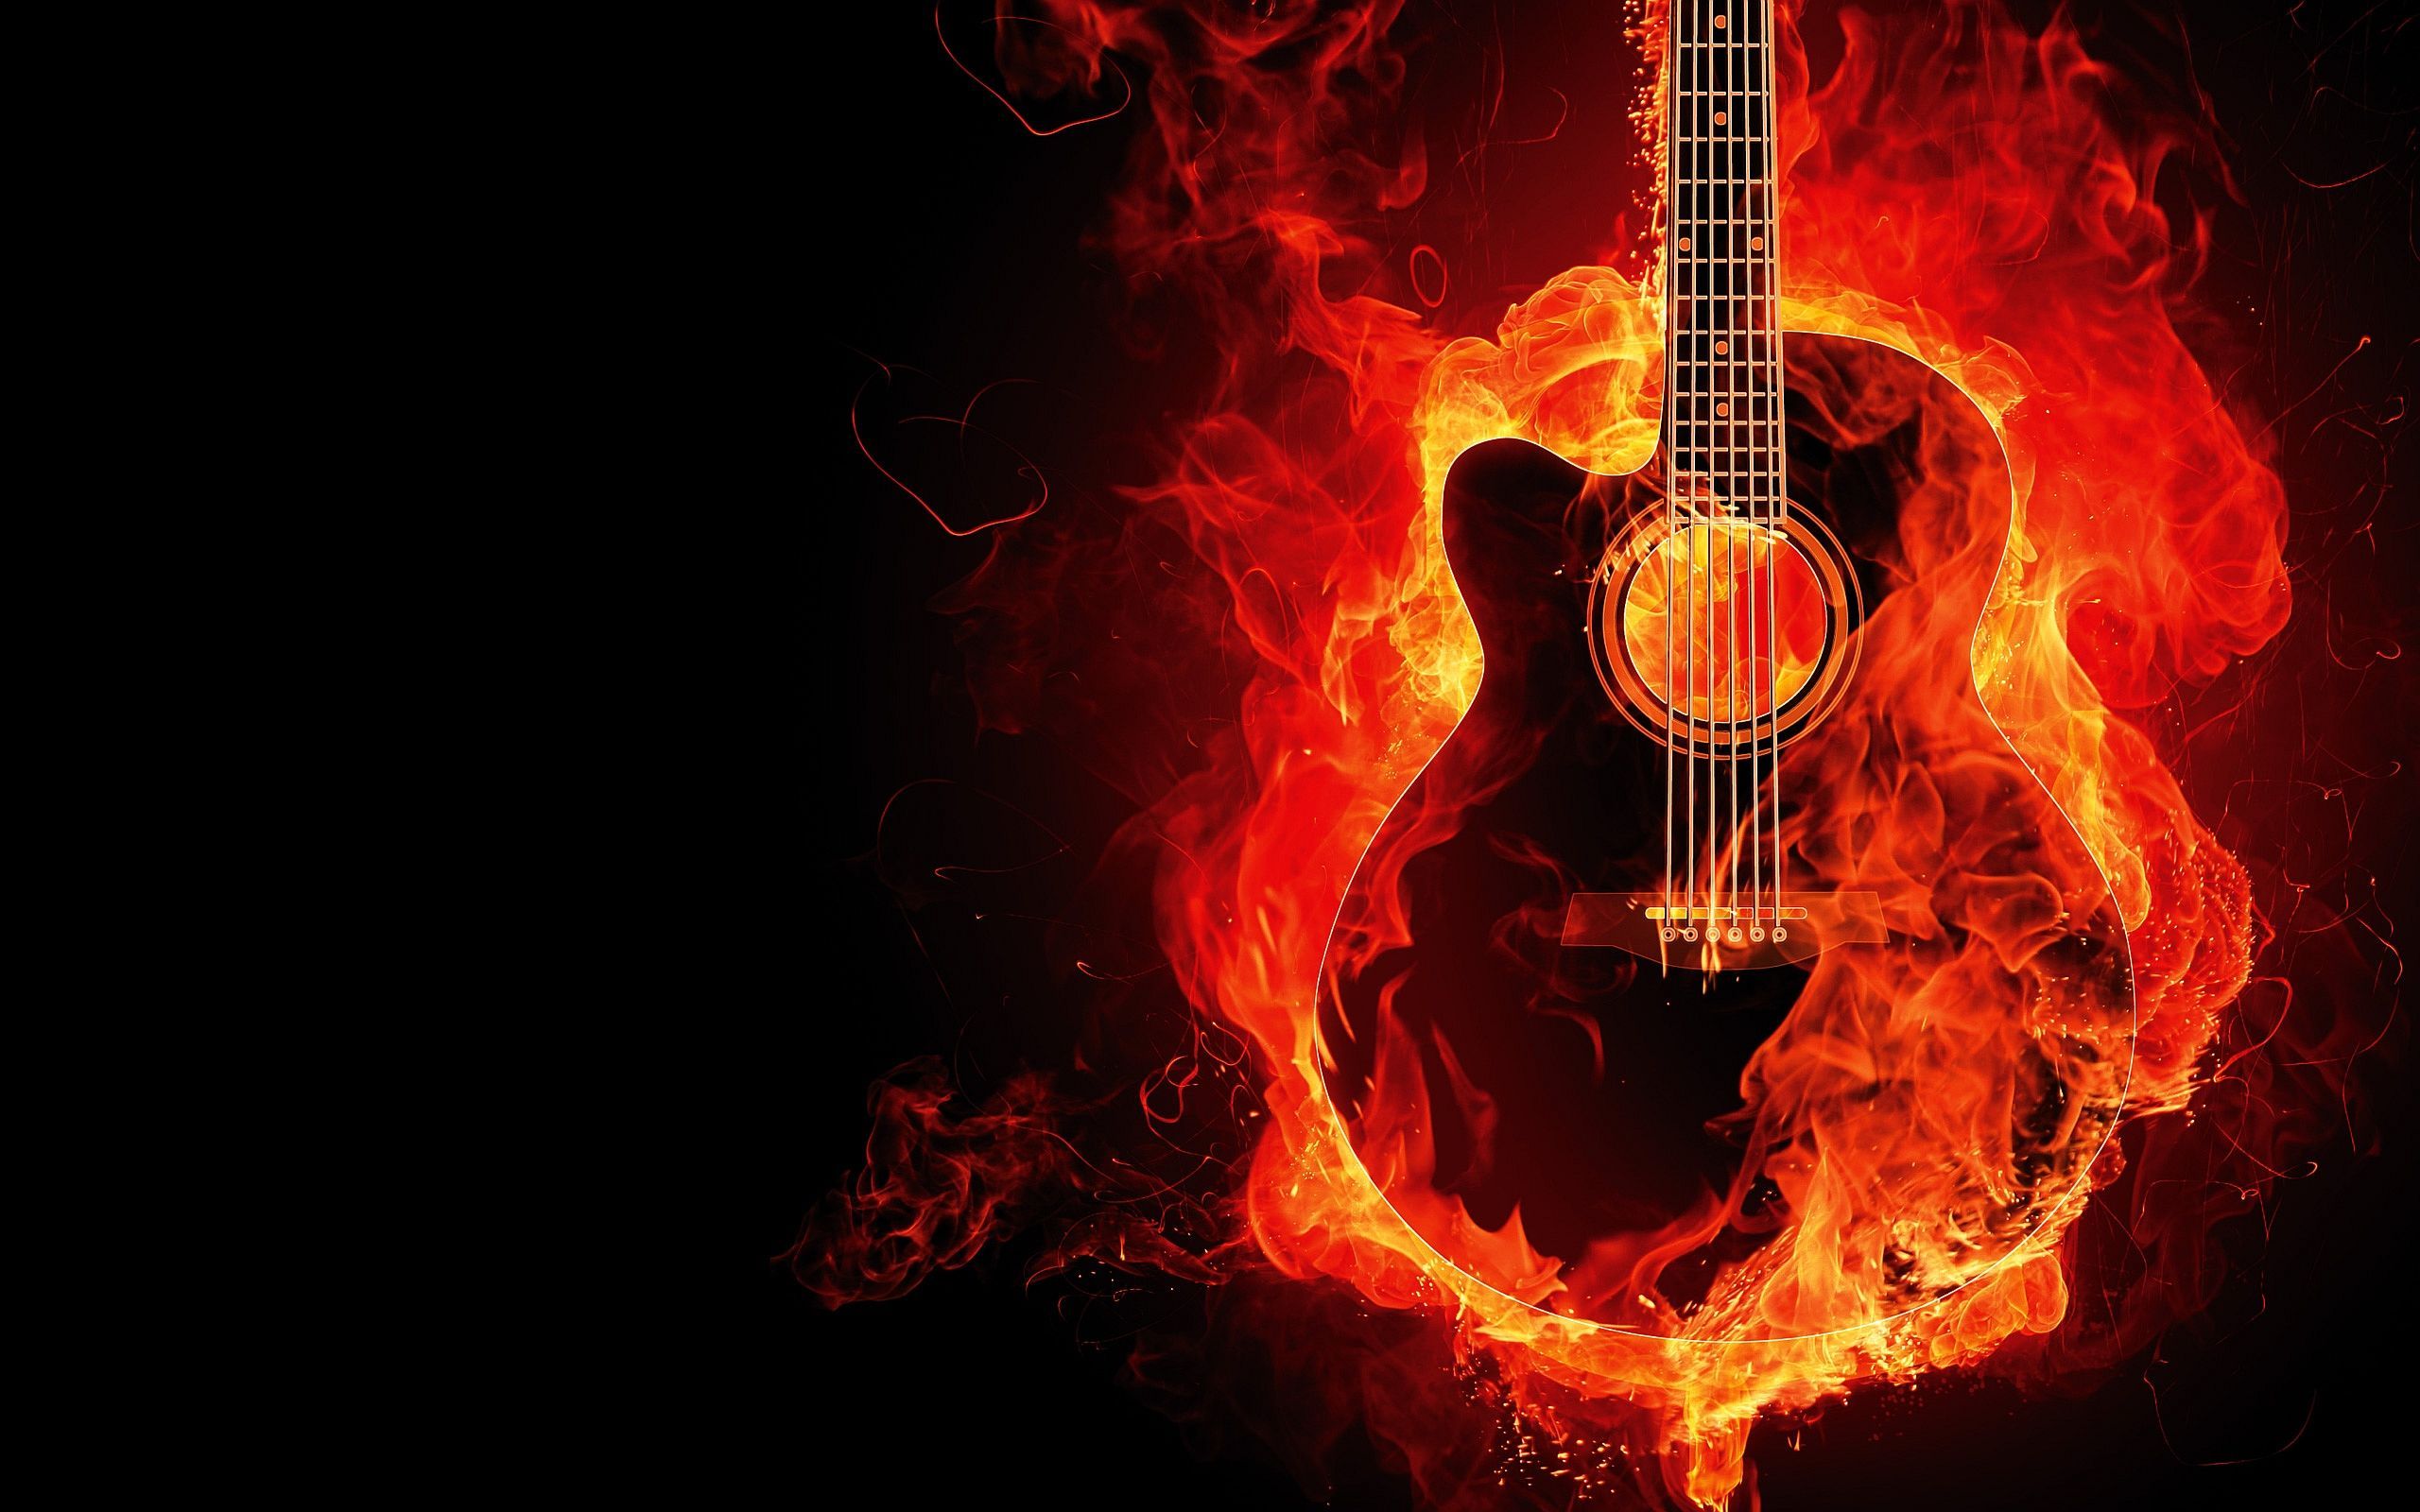 Guitar on Fire hd wallpaper | Only hd wallpapers